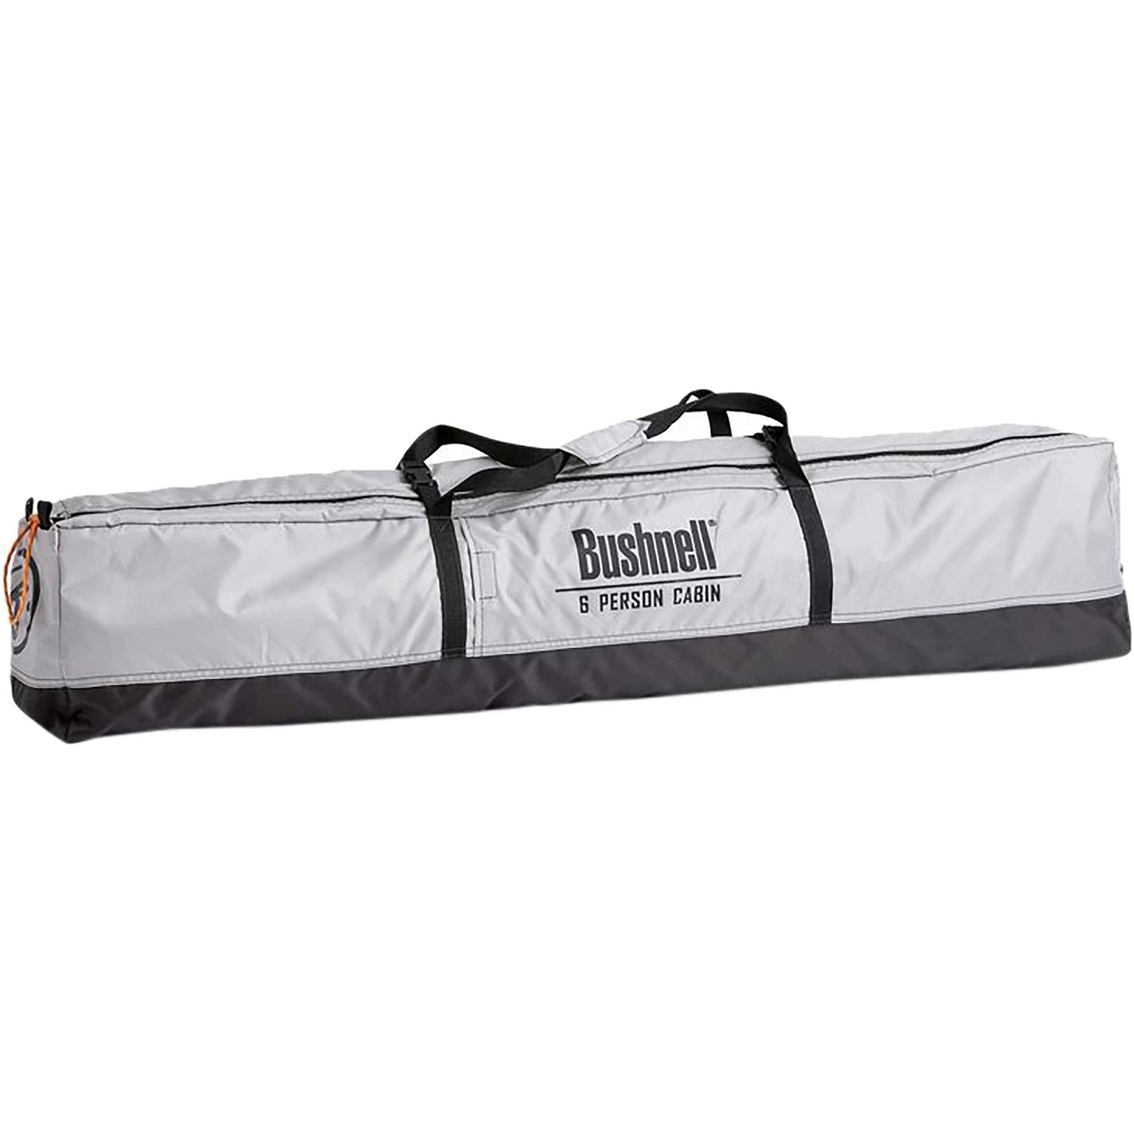 Bushnell 12P Outdoorsman Instant Cabin Tent - Image 3 of 10